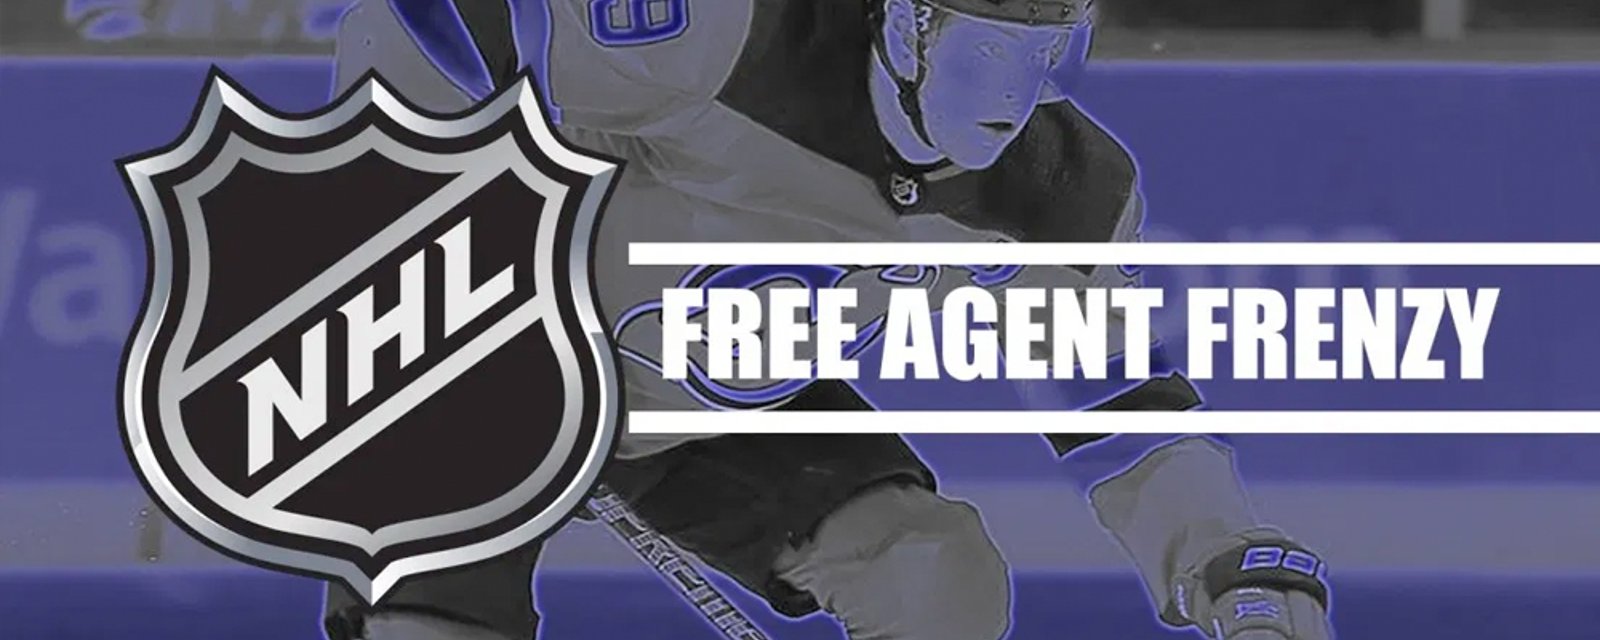 NHL makes key changes to free agency in new CBA